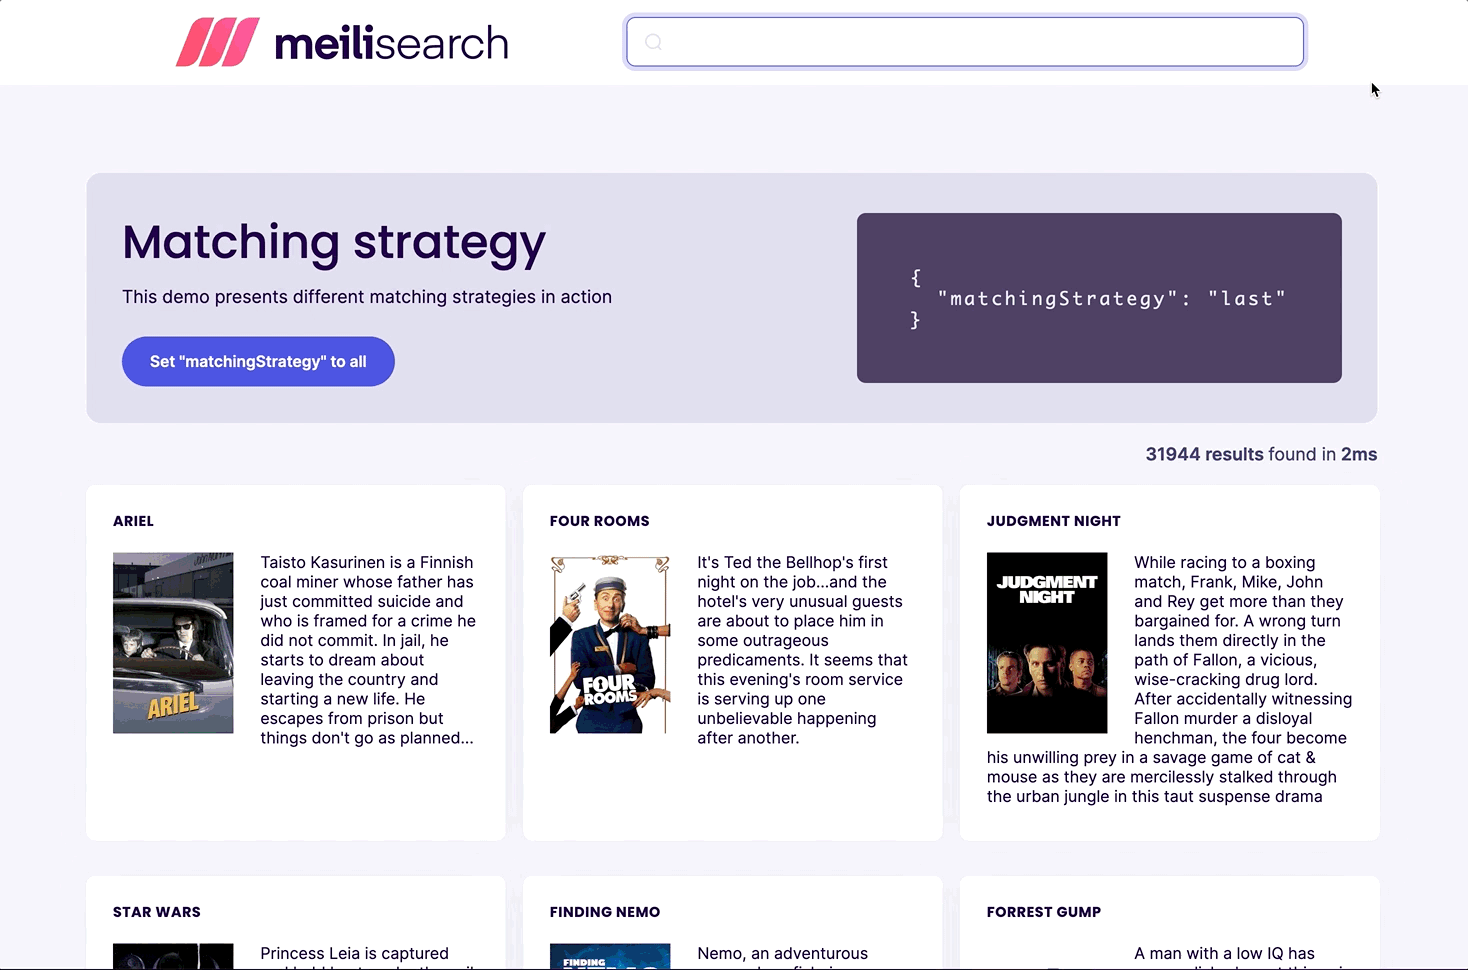 When searching for "the hateful eight", Meilisearch finds 28412 results with the "last" matching strategy versus one result with the "all" matching strategy